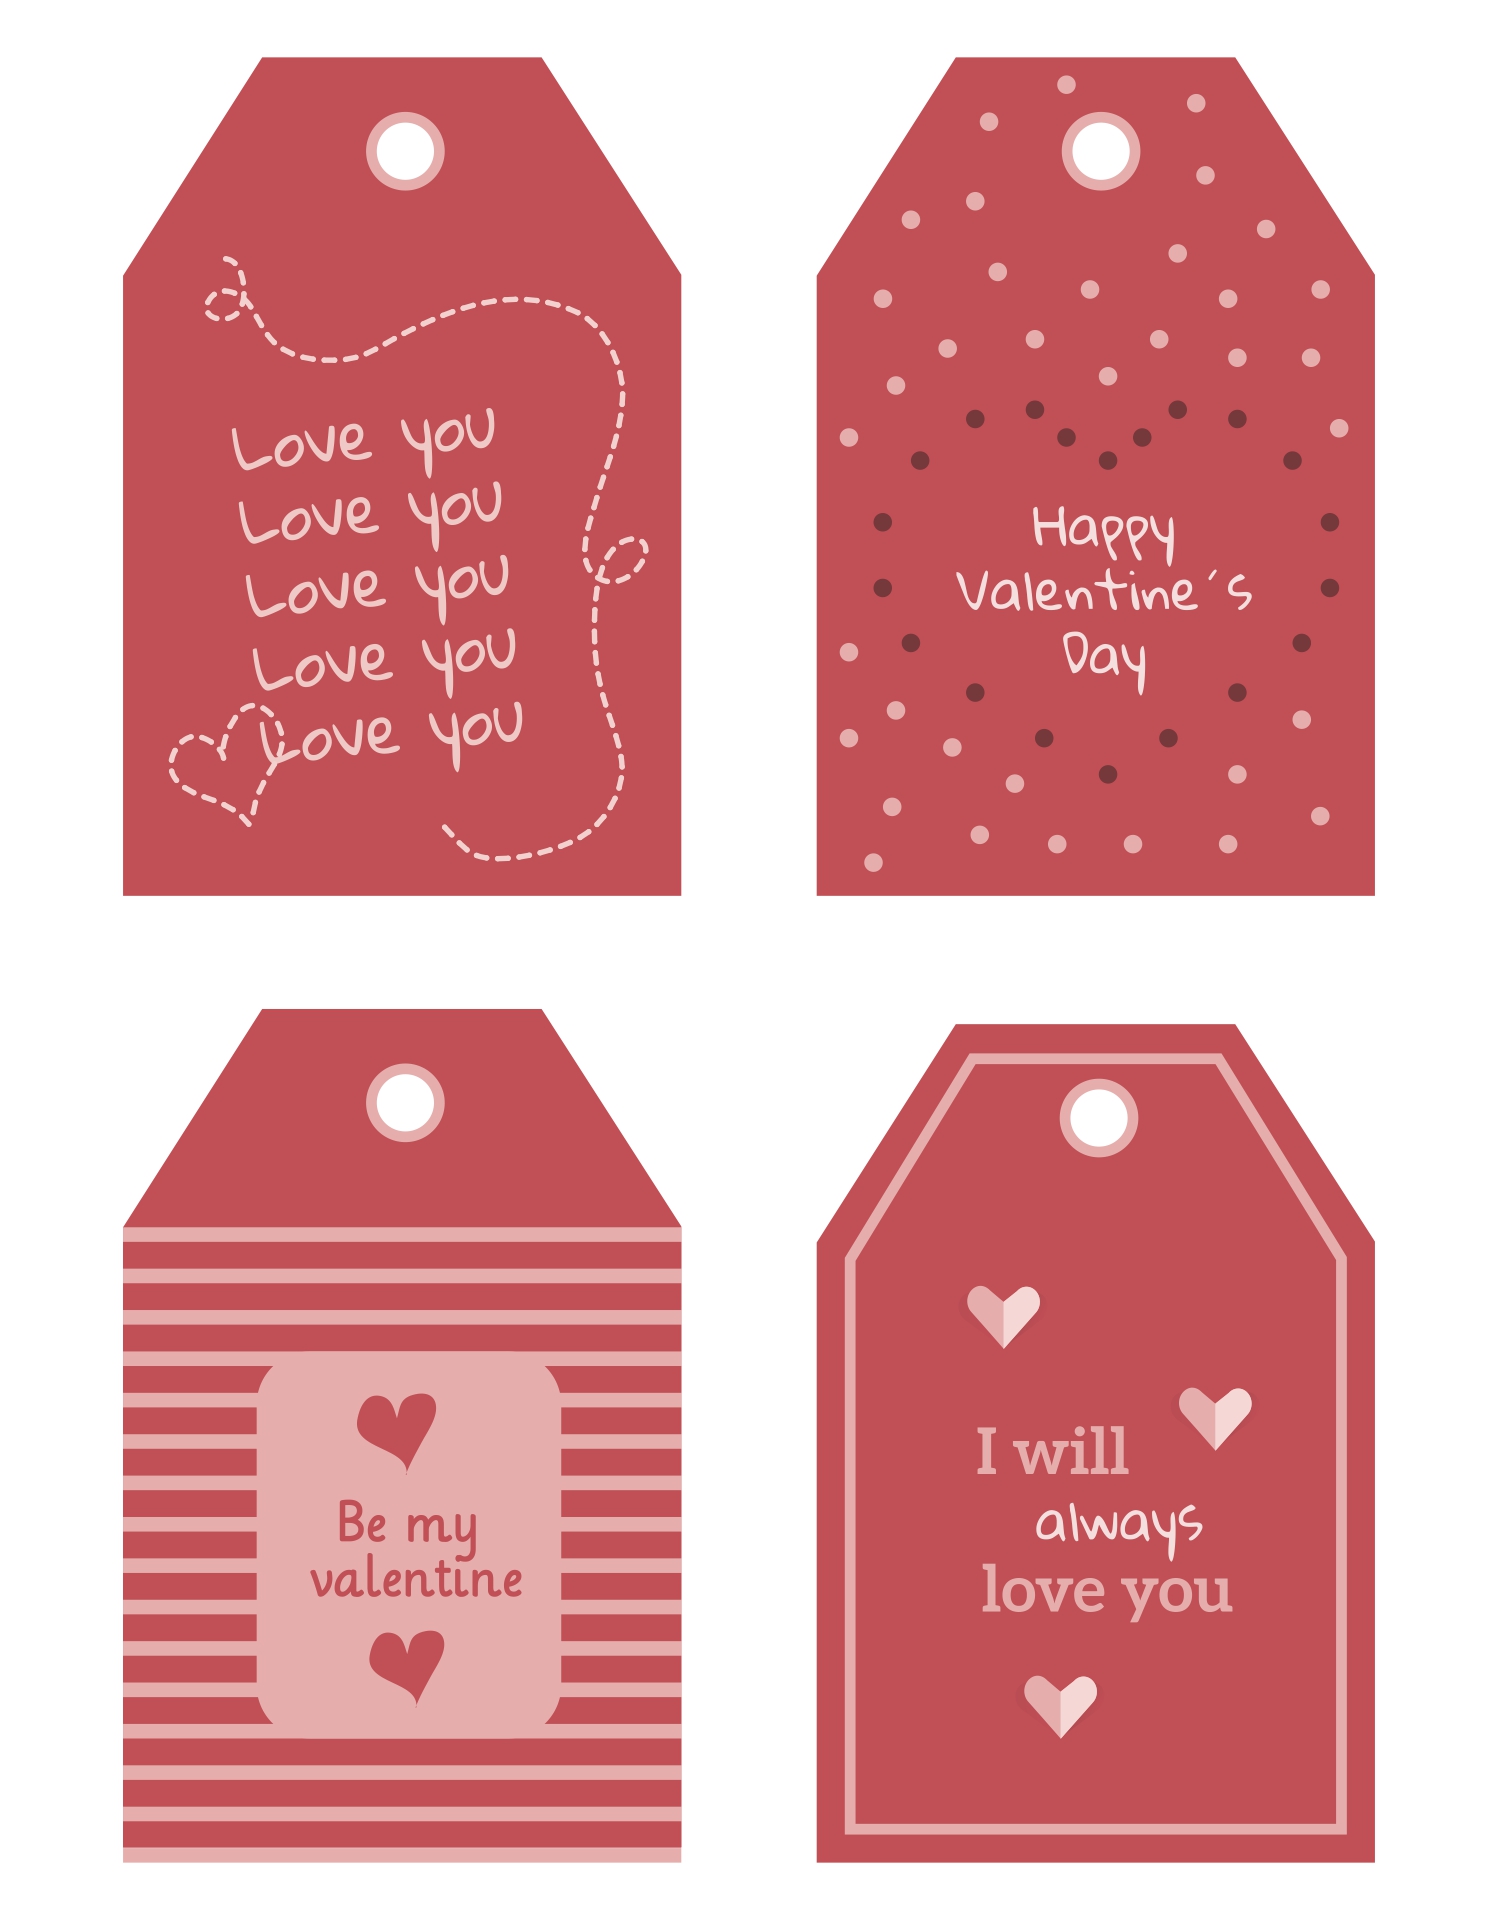 6-best-images-of-happy-valentine-printable-gift-tags-valentine-s-day-printable-gift-tags